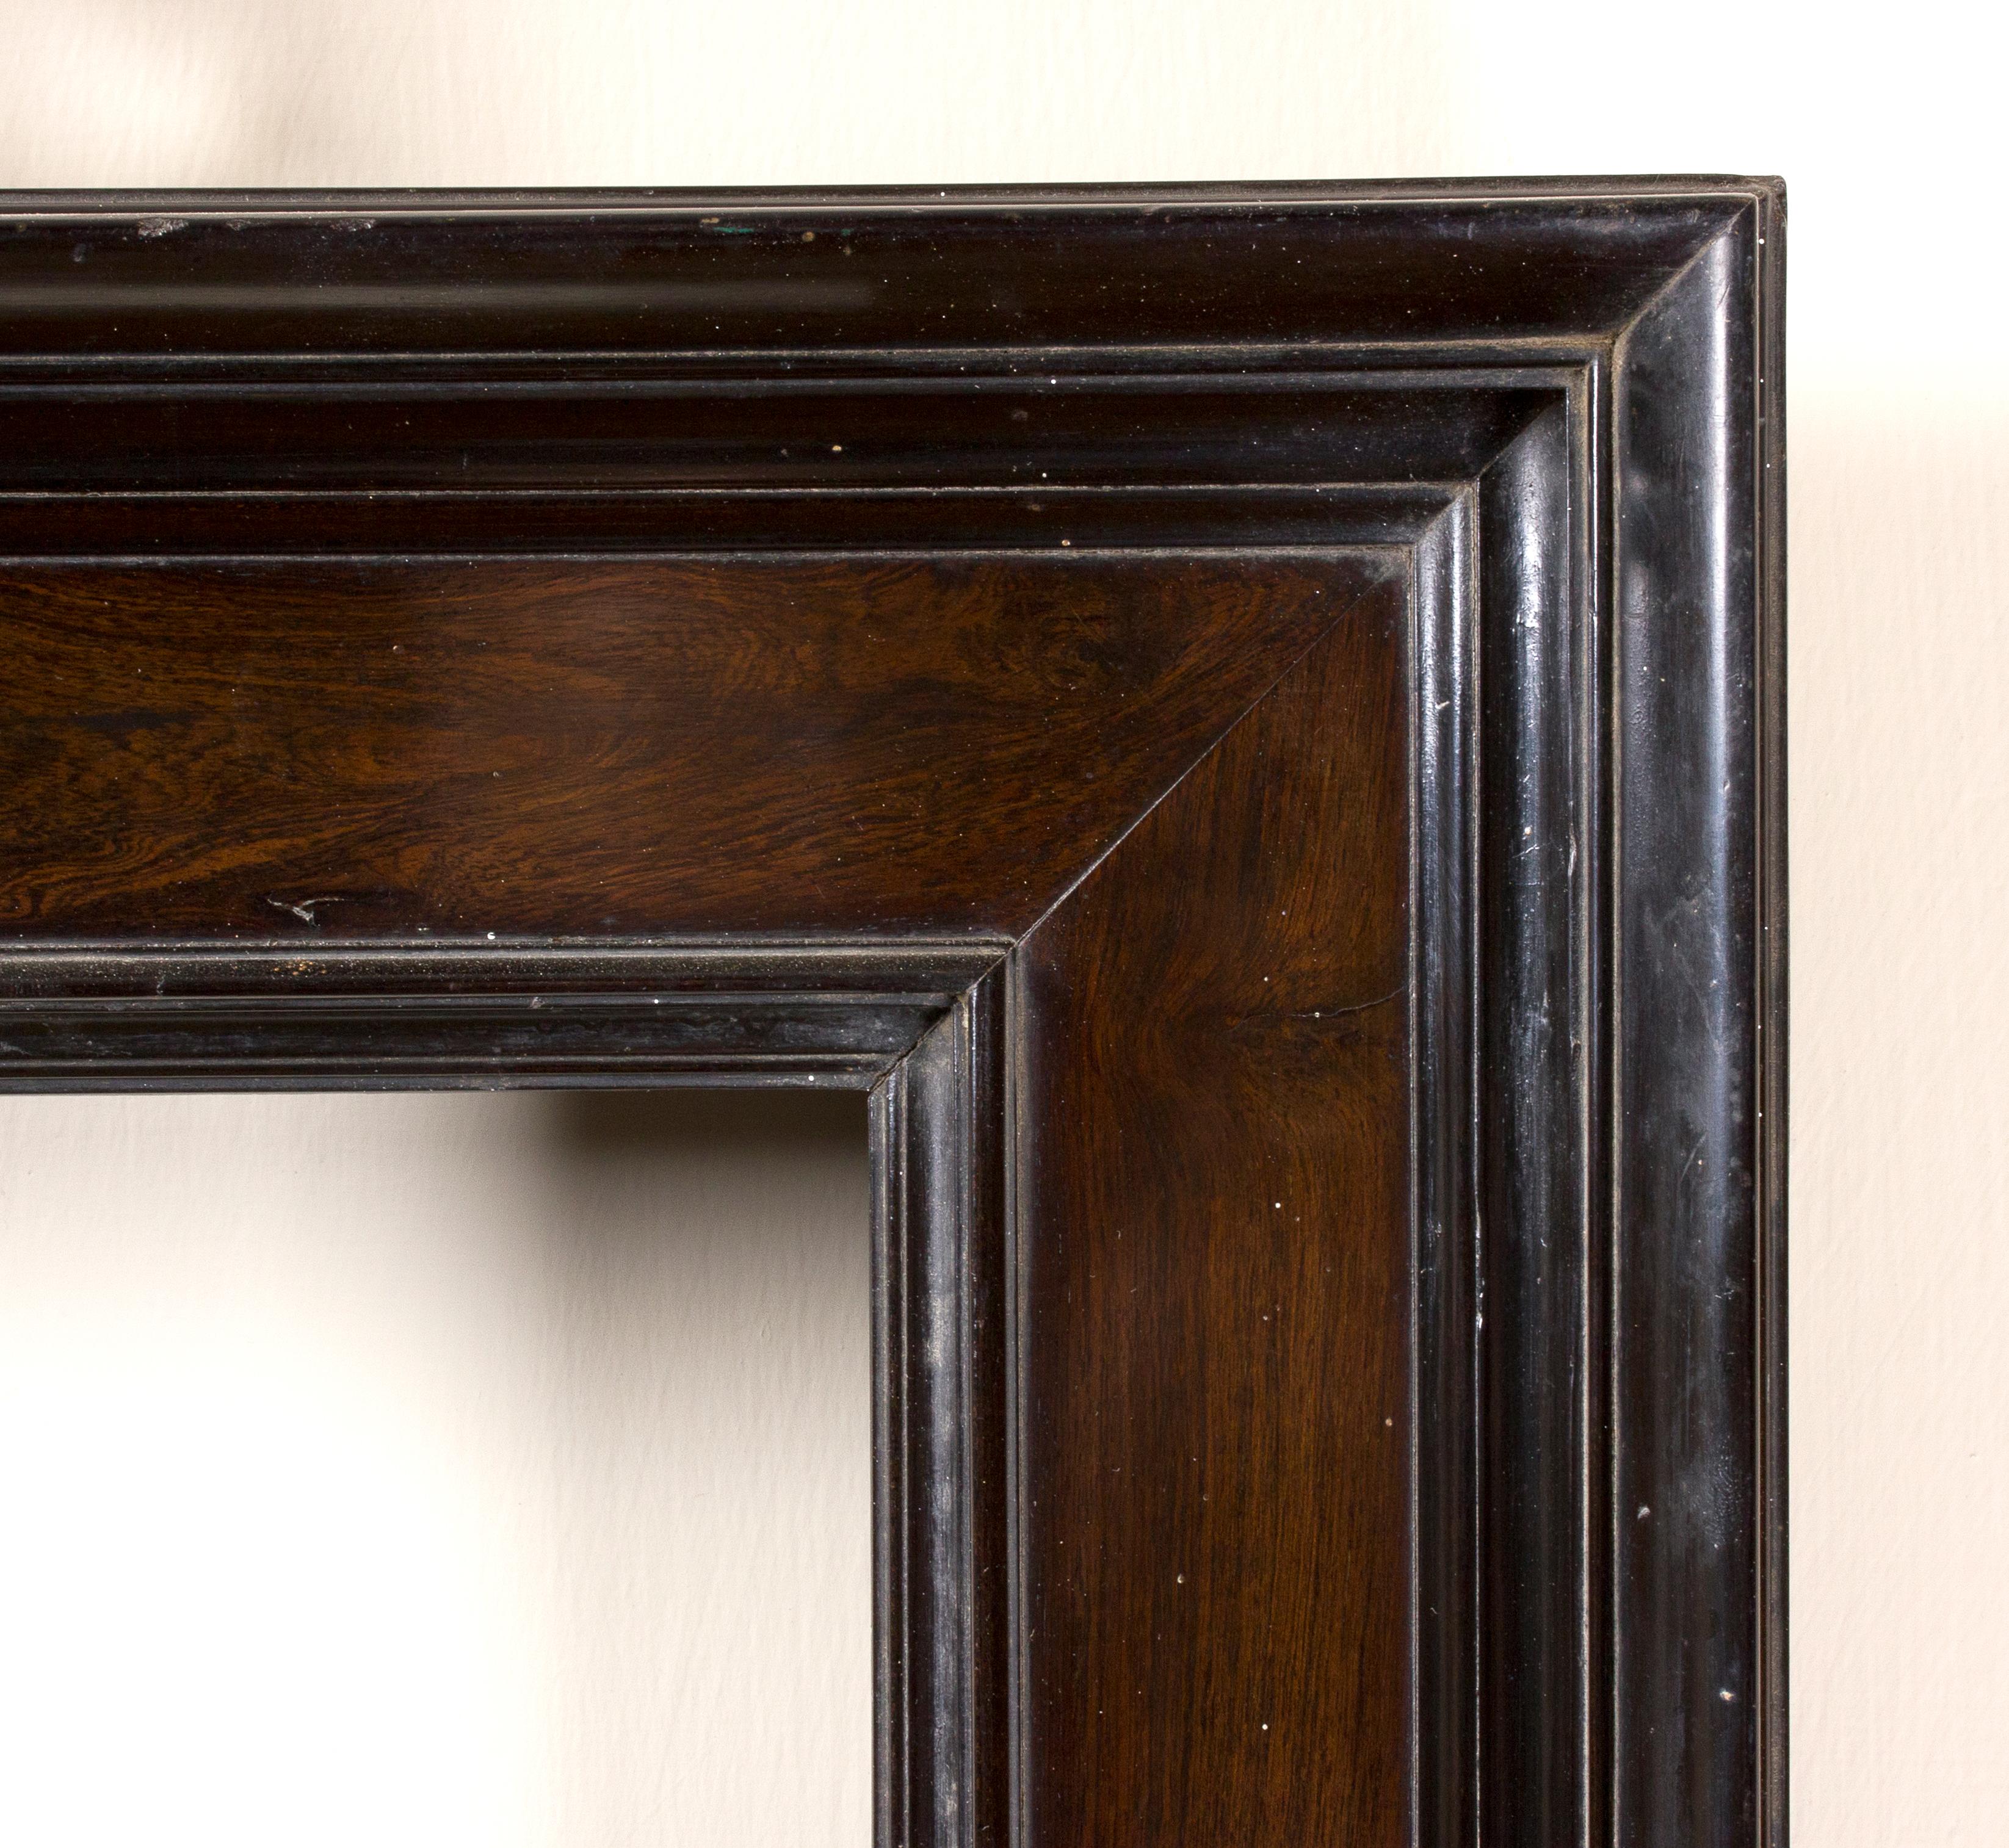 Flanders frame, late 16th-early 17th century
Ebony and rosewood carved frame, cassetta profile.
Measures: Inside: 29.3 x 24 cm; outside: 45 x 39 cm.
Depth is the wide of the band.
  